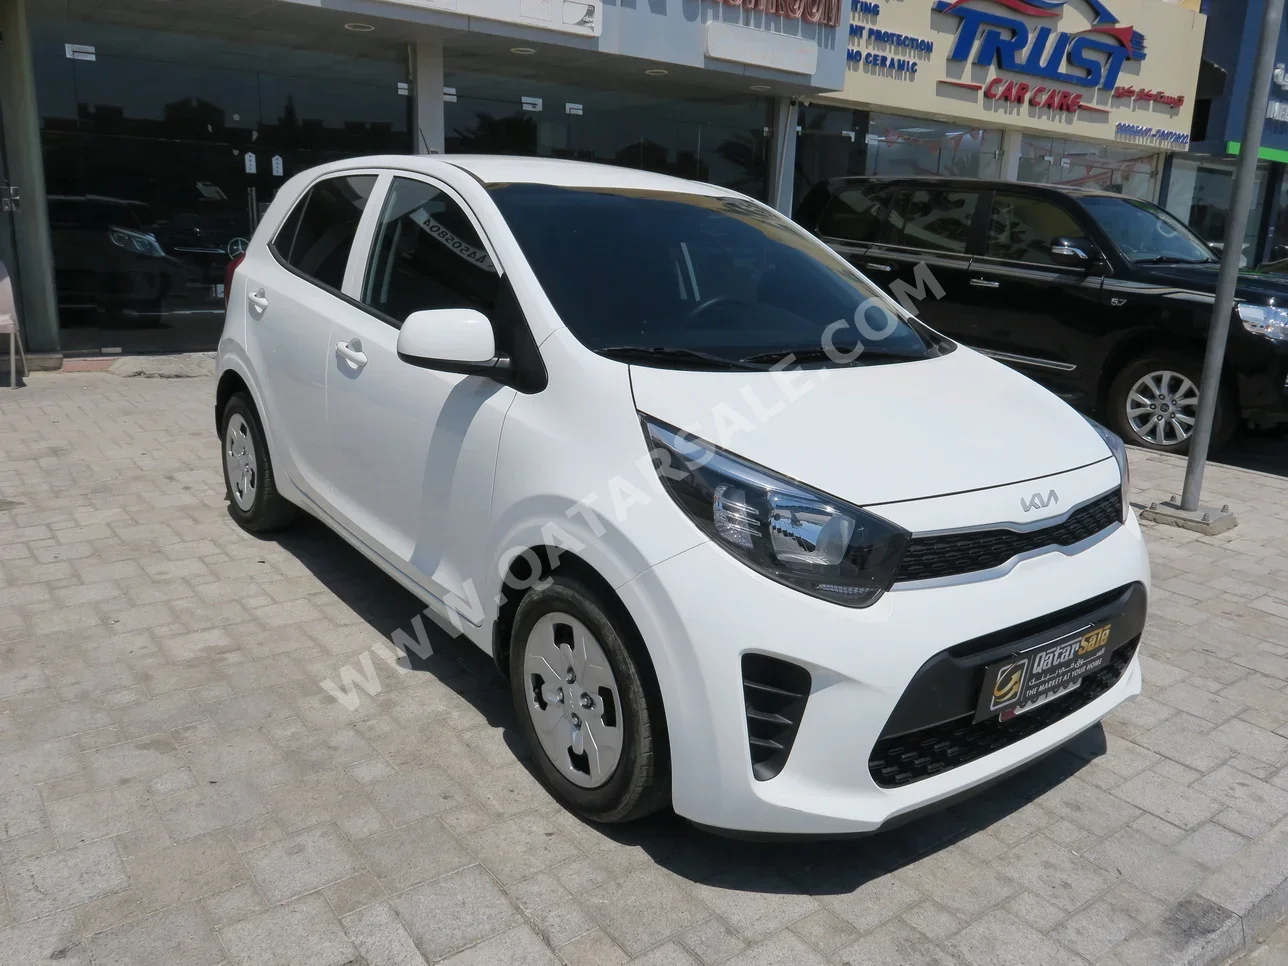 Kia  Picanto  2022  Automatic  36,000 Km  4 Cylinder  Front Wheel Drive (FWD)  Sedan  White  With Warranty